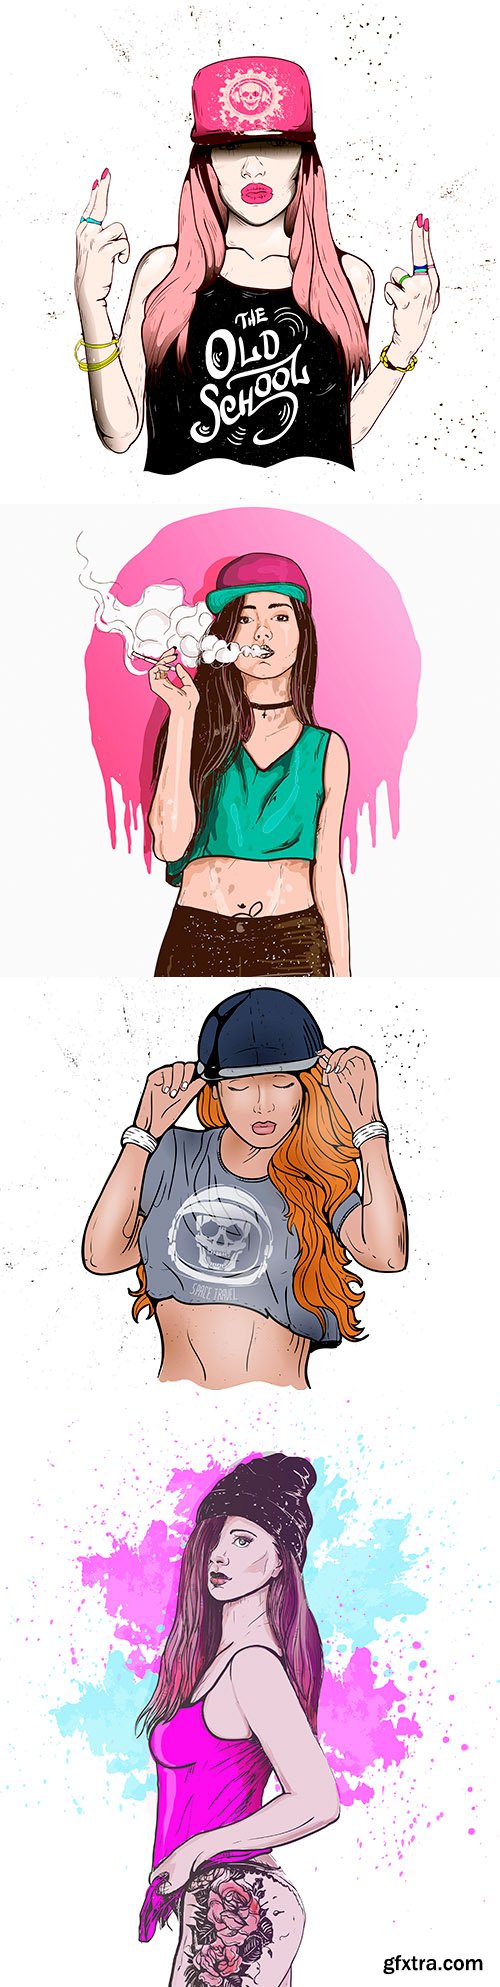 Fashion and stylish young girl in cap rap style illustrations